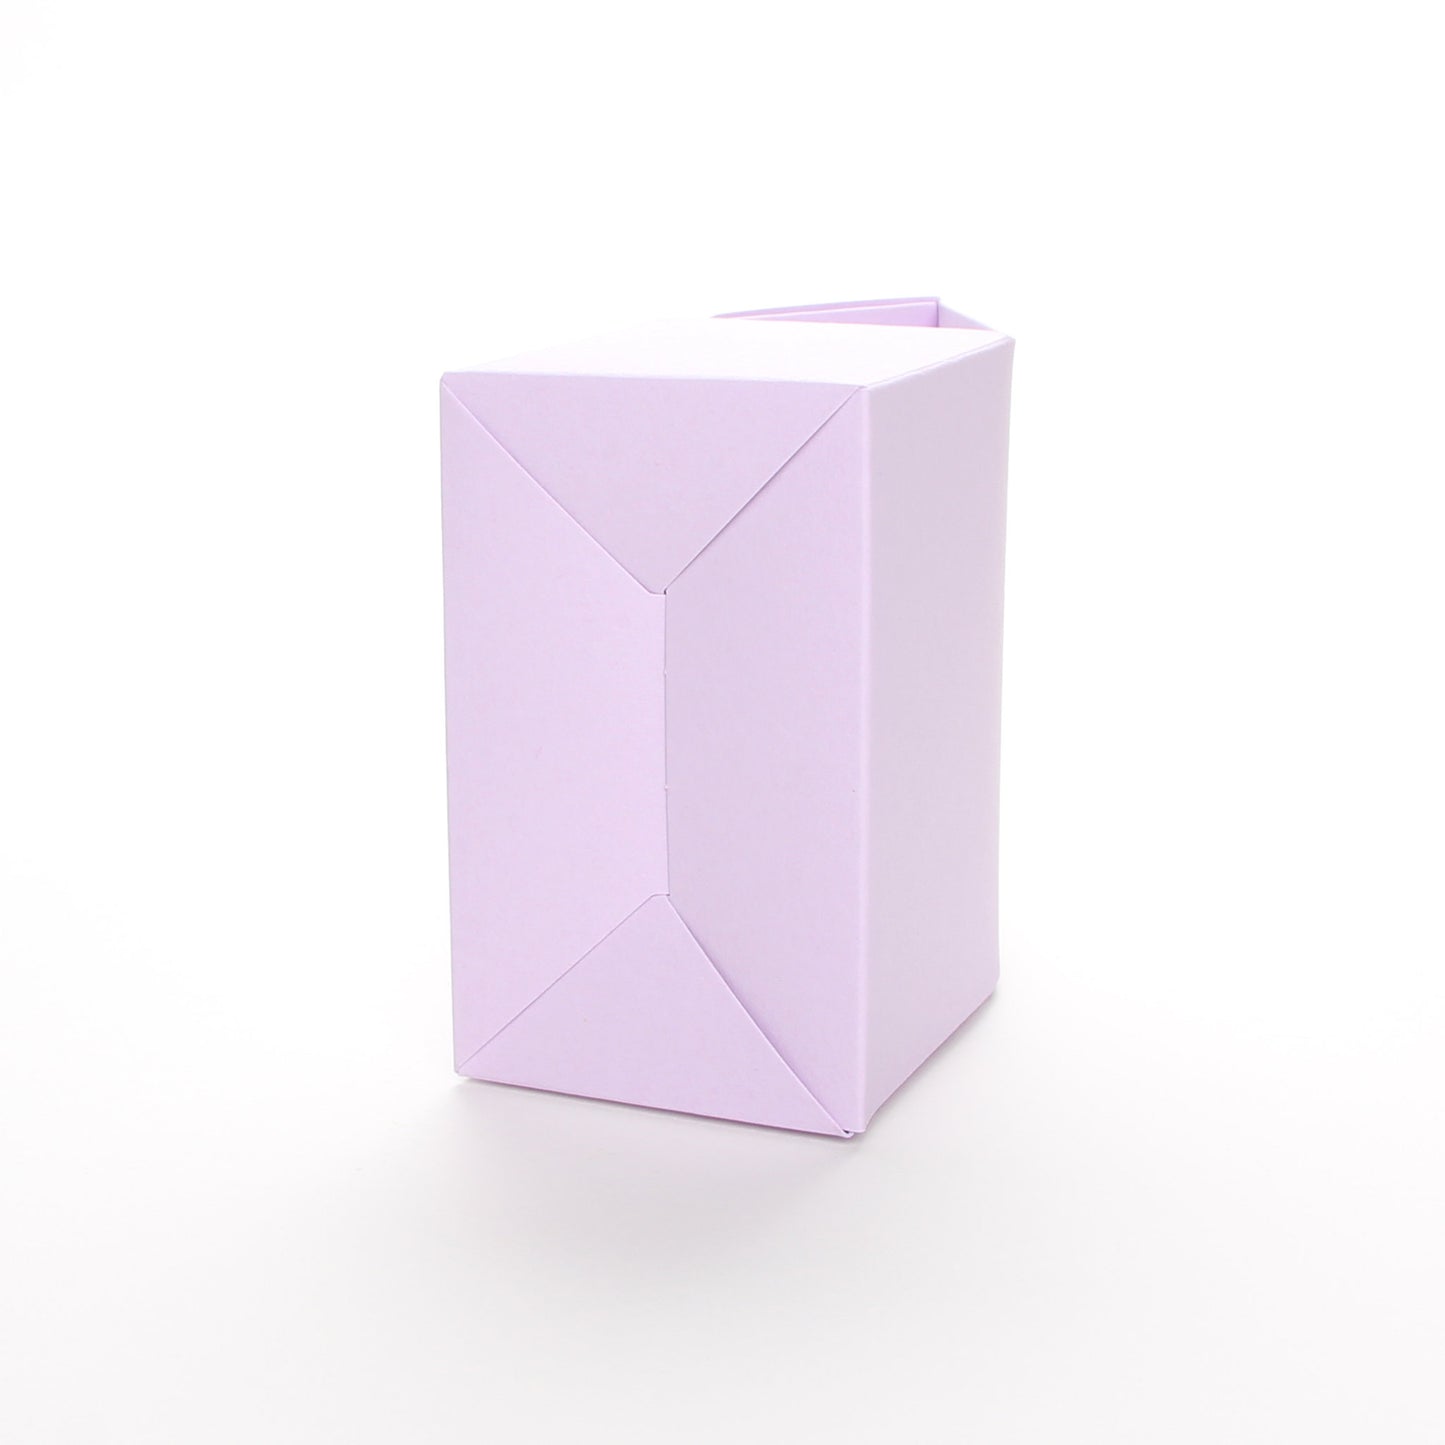 Bottom view of Lux Party’s lavender favor box on a white background.